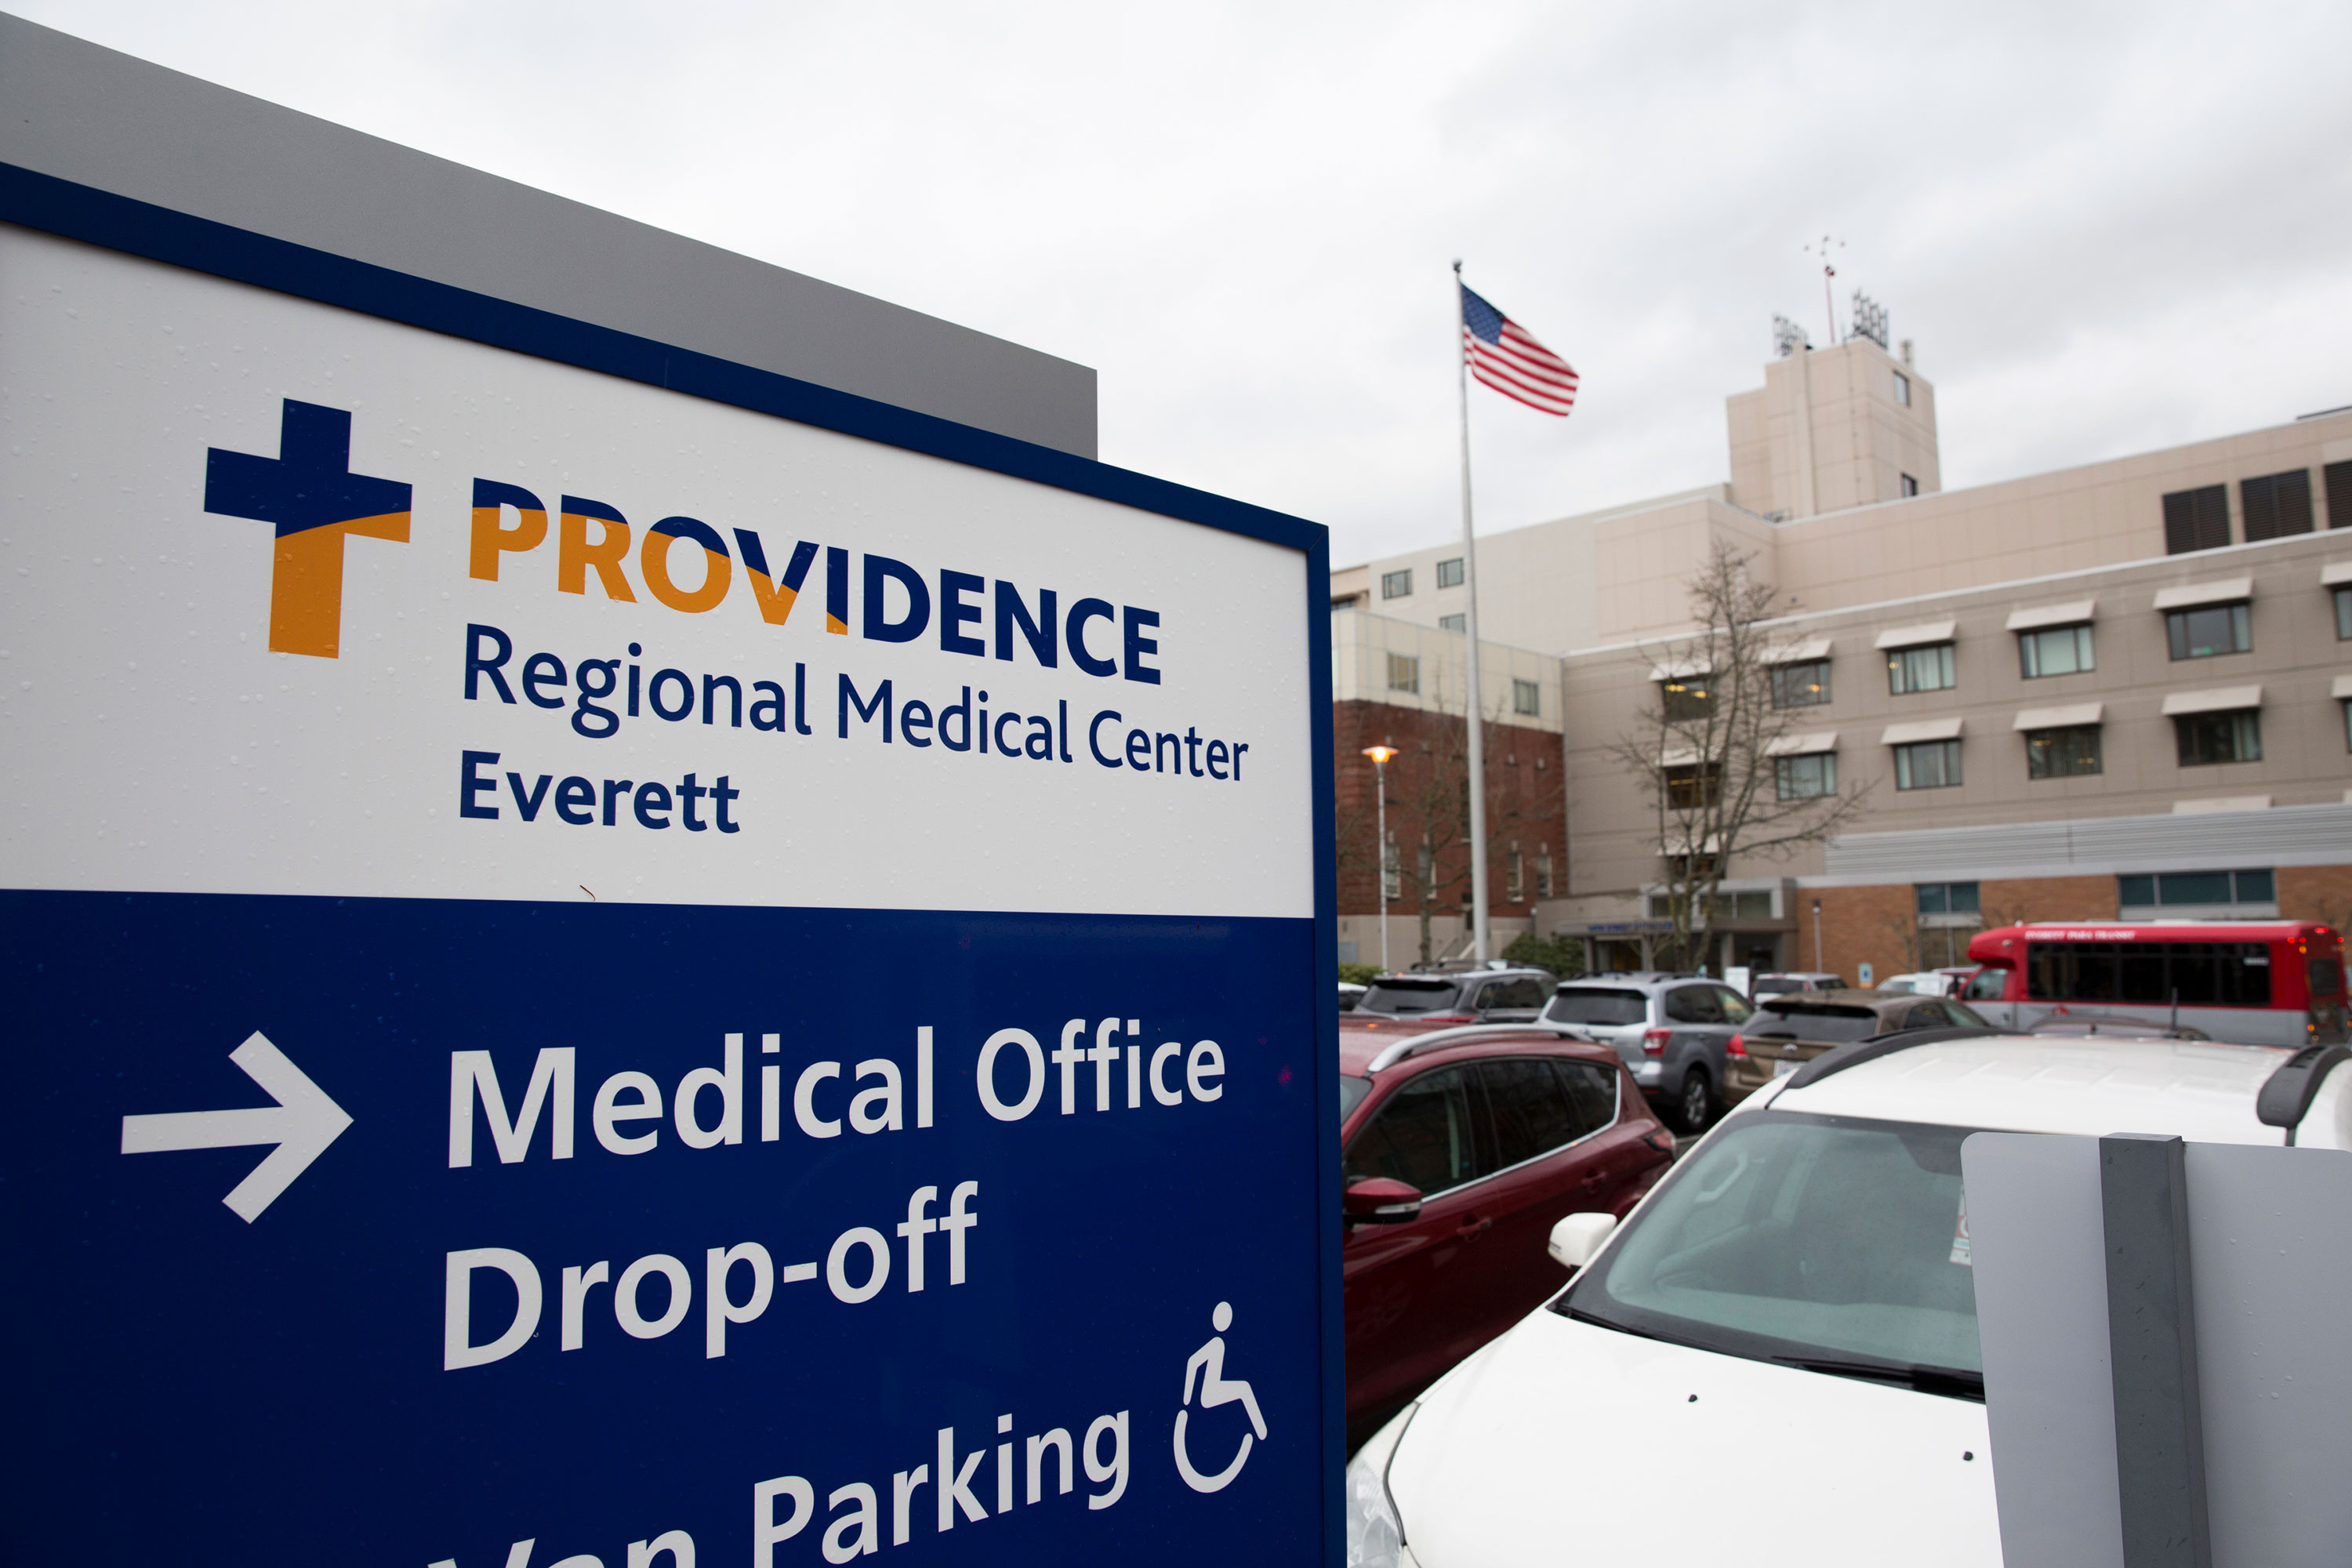 Providence Regional Medical Center, where the first known person infected with Covid-19 in the United States was being observed, is seen in Everett, Washington, on January 21, 2020.